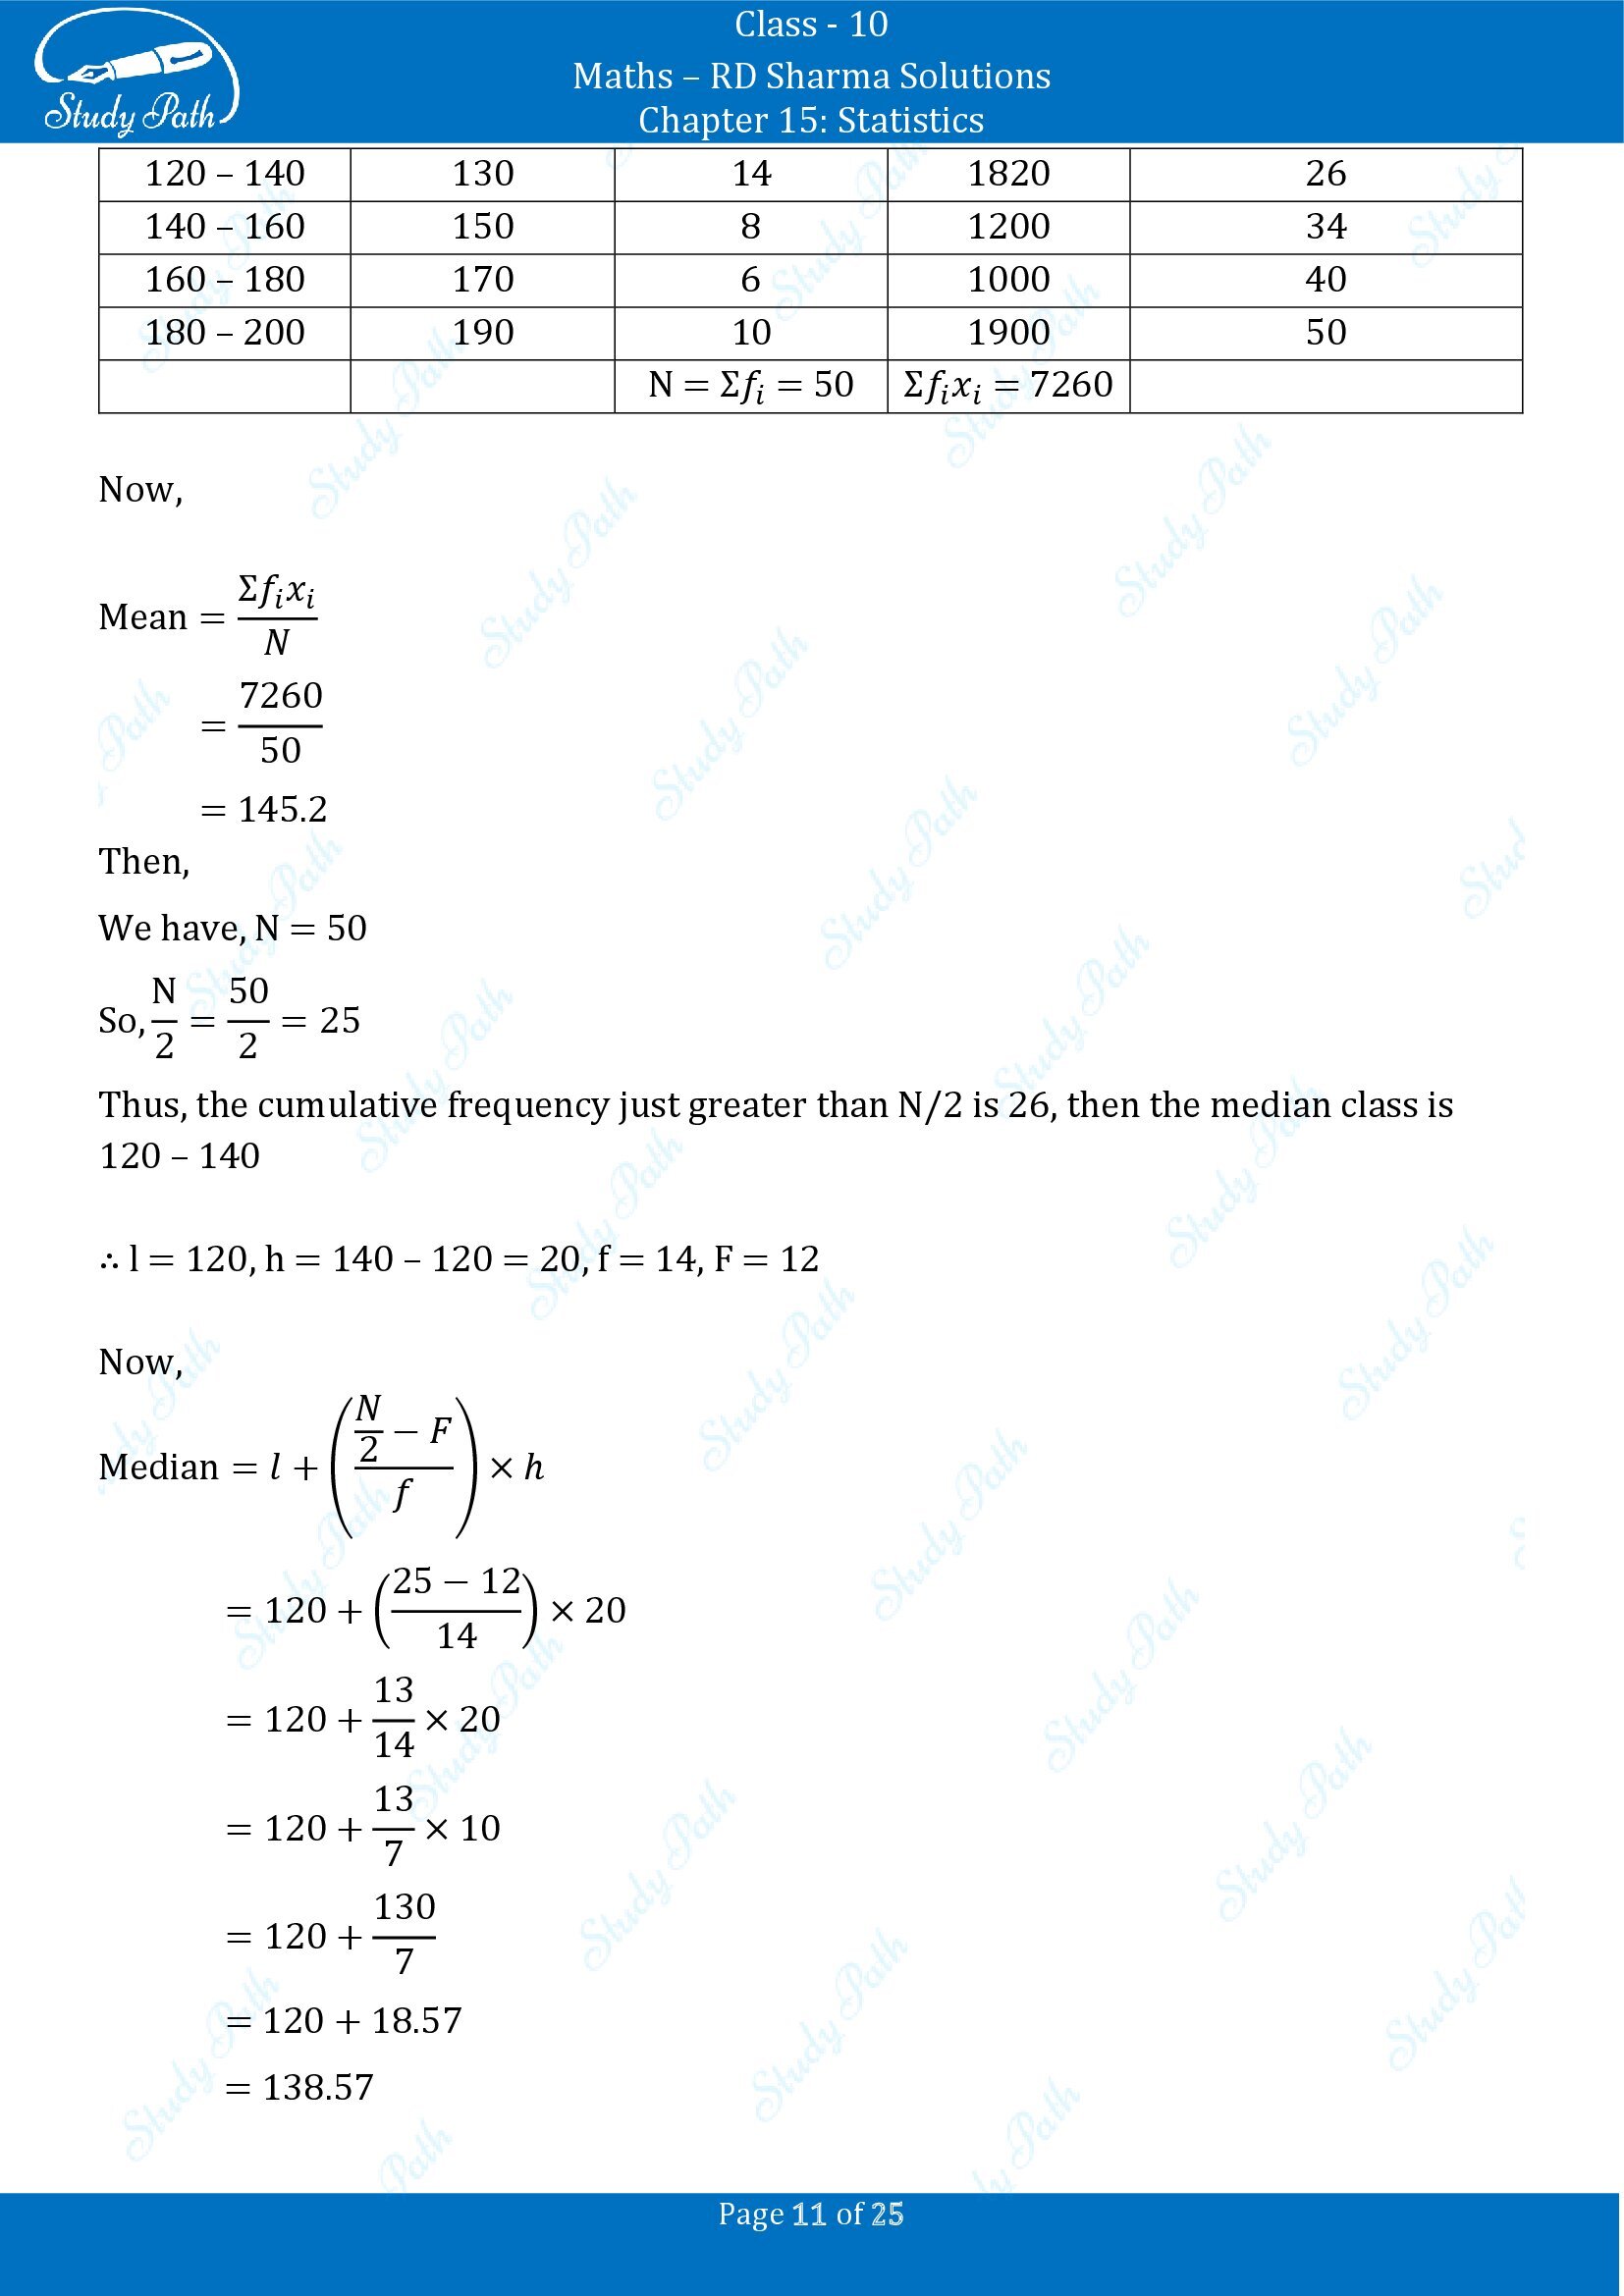 RD Sharma Solutions Class 10 Chapter 15 Statistics Exercise 15.5 00011